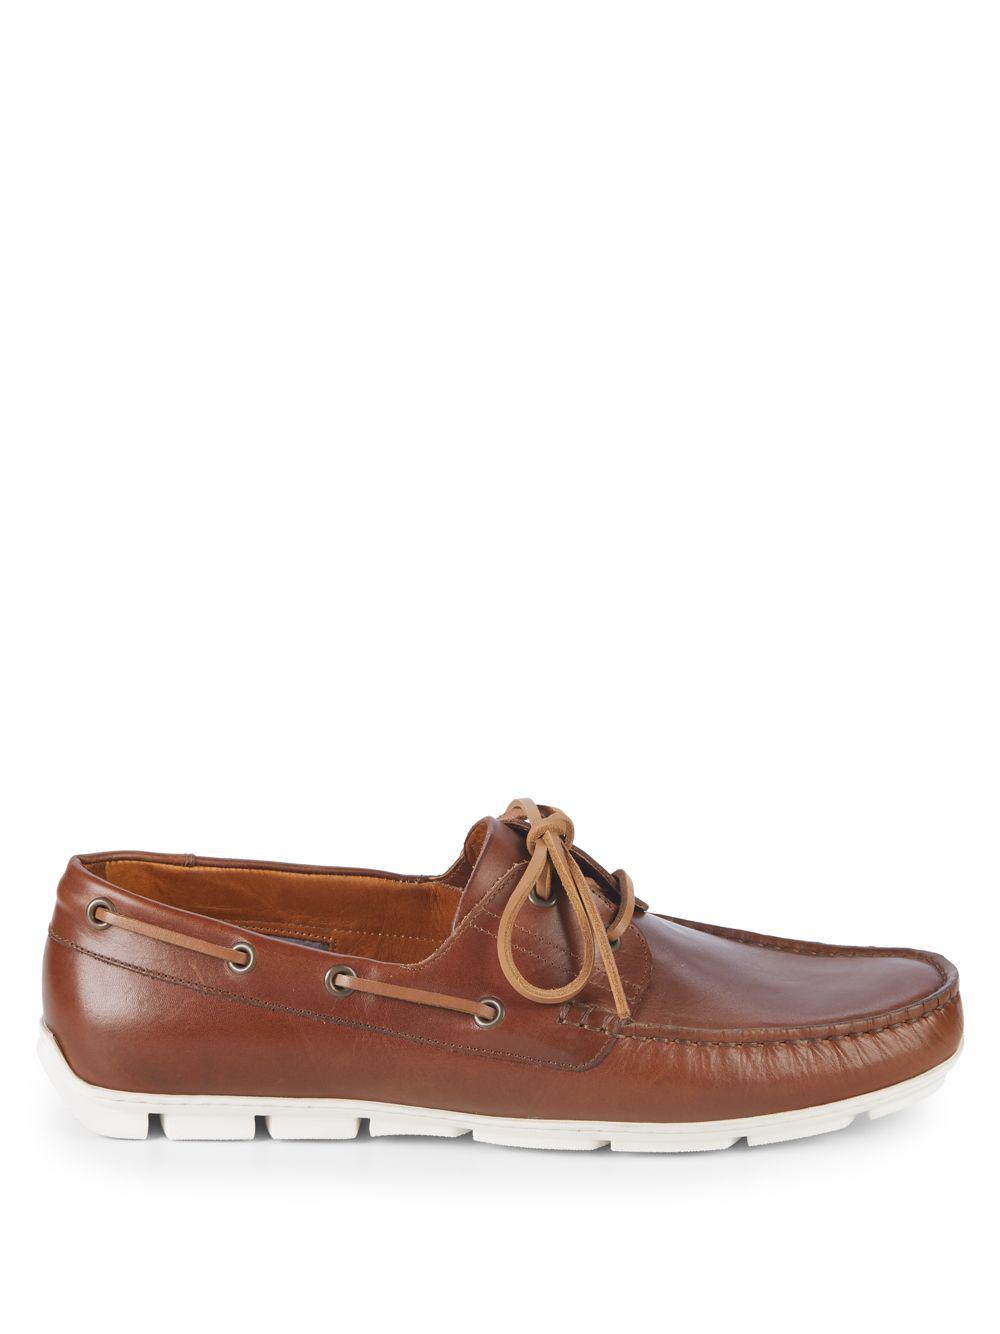 Vince Camuto Don Leather Boat Shoes in Caramel (Brown) for Men - Lyst